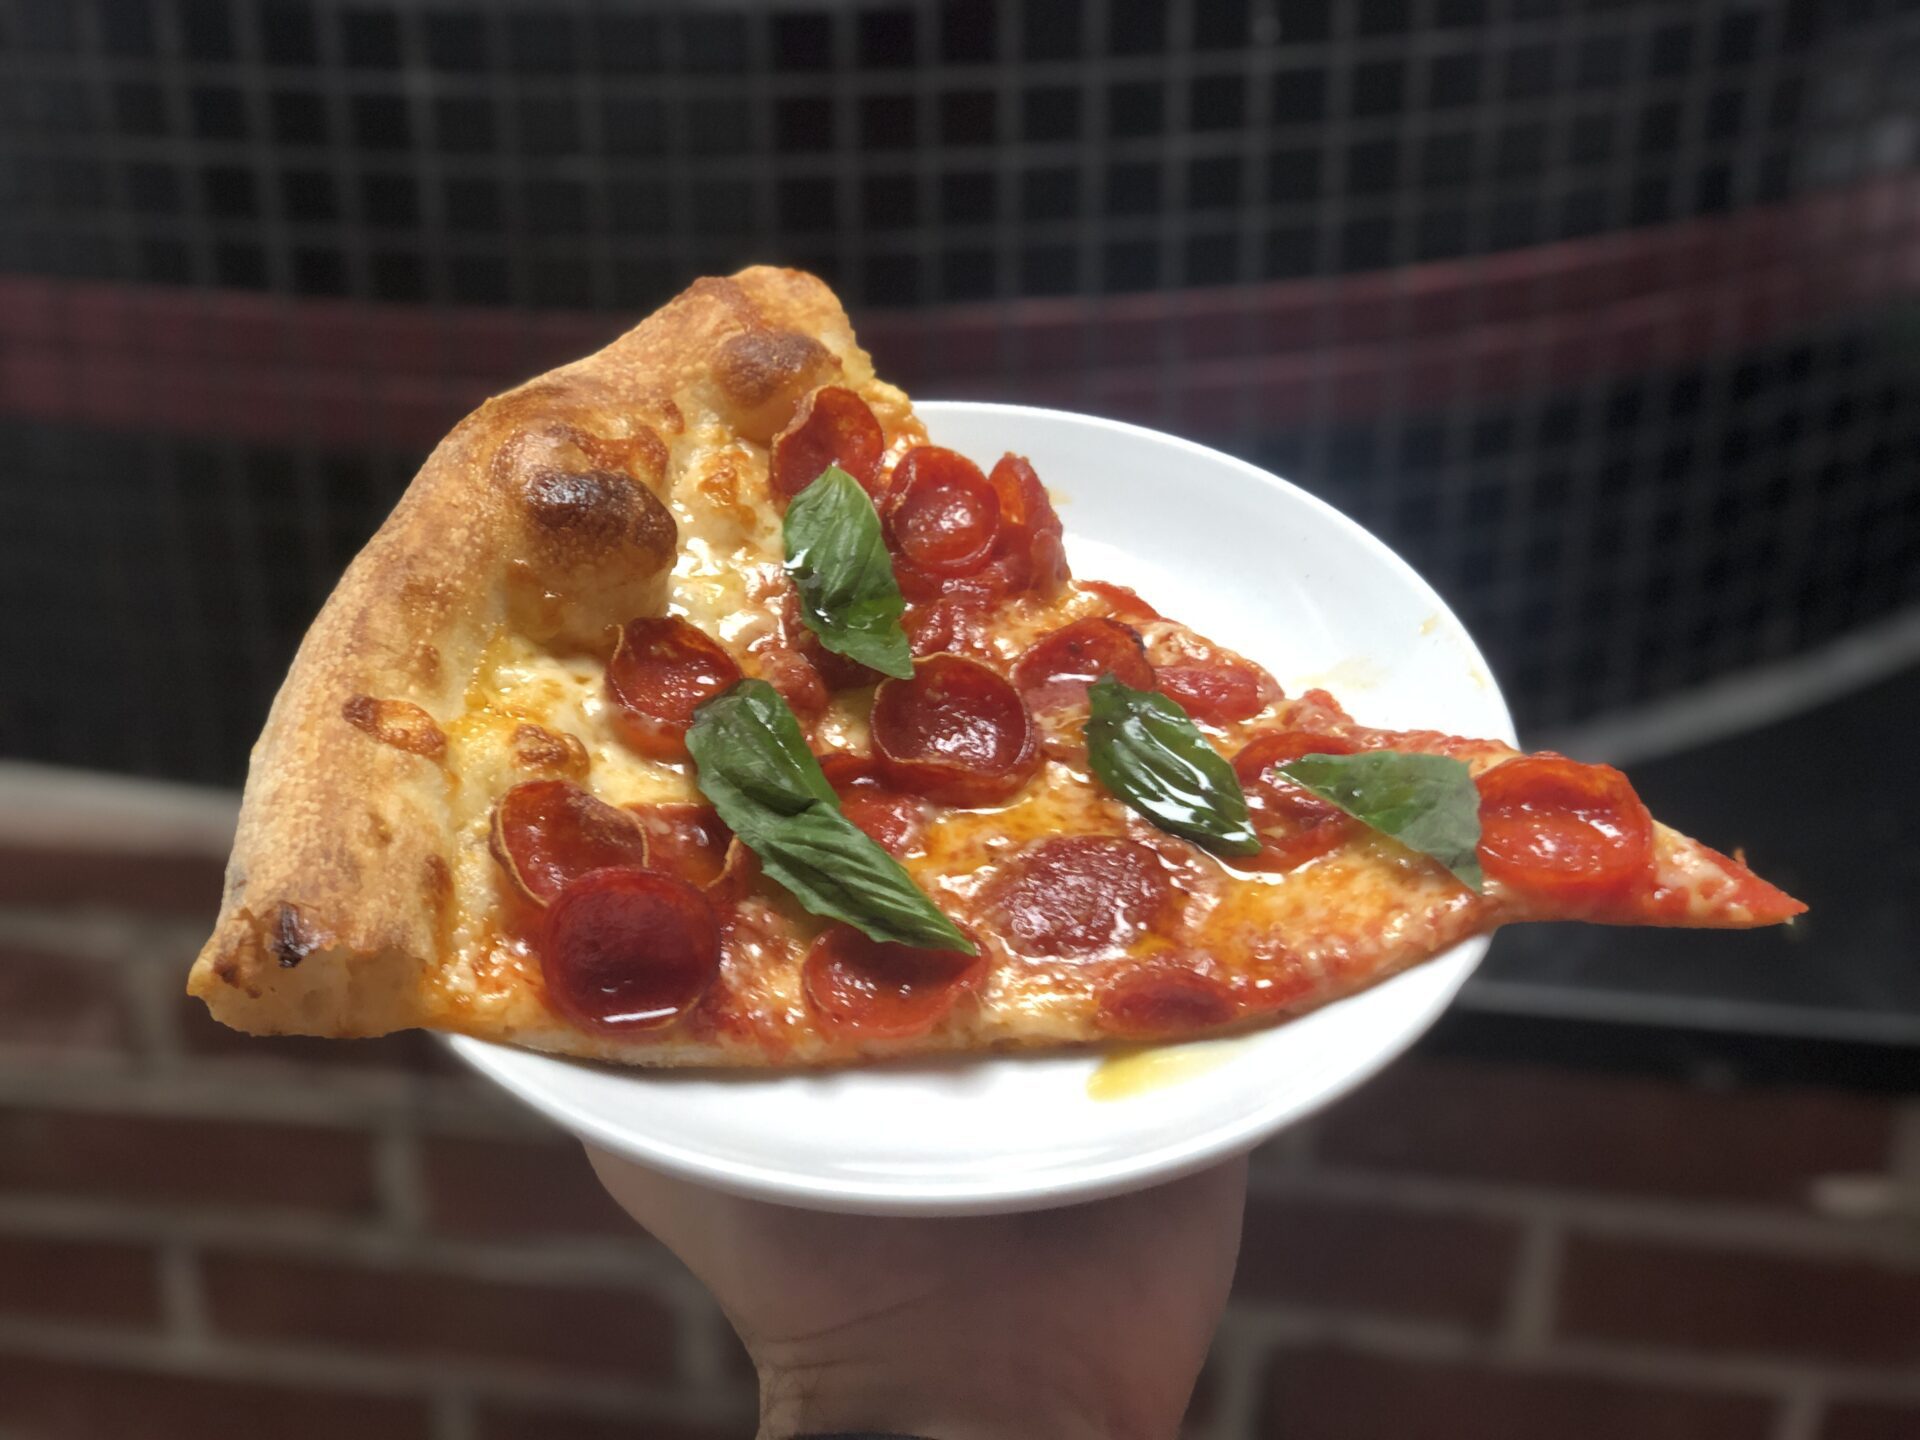 Perfect Slice of Pizza. With tomatoes, basil, pepperoni, and golden crust.